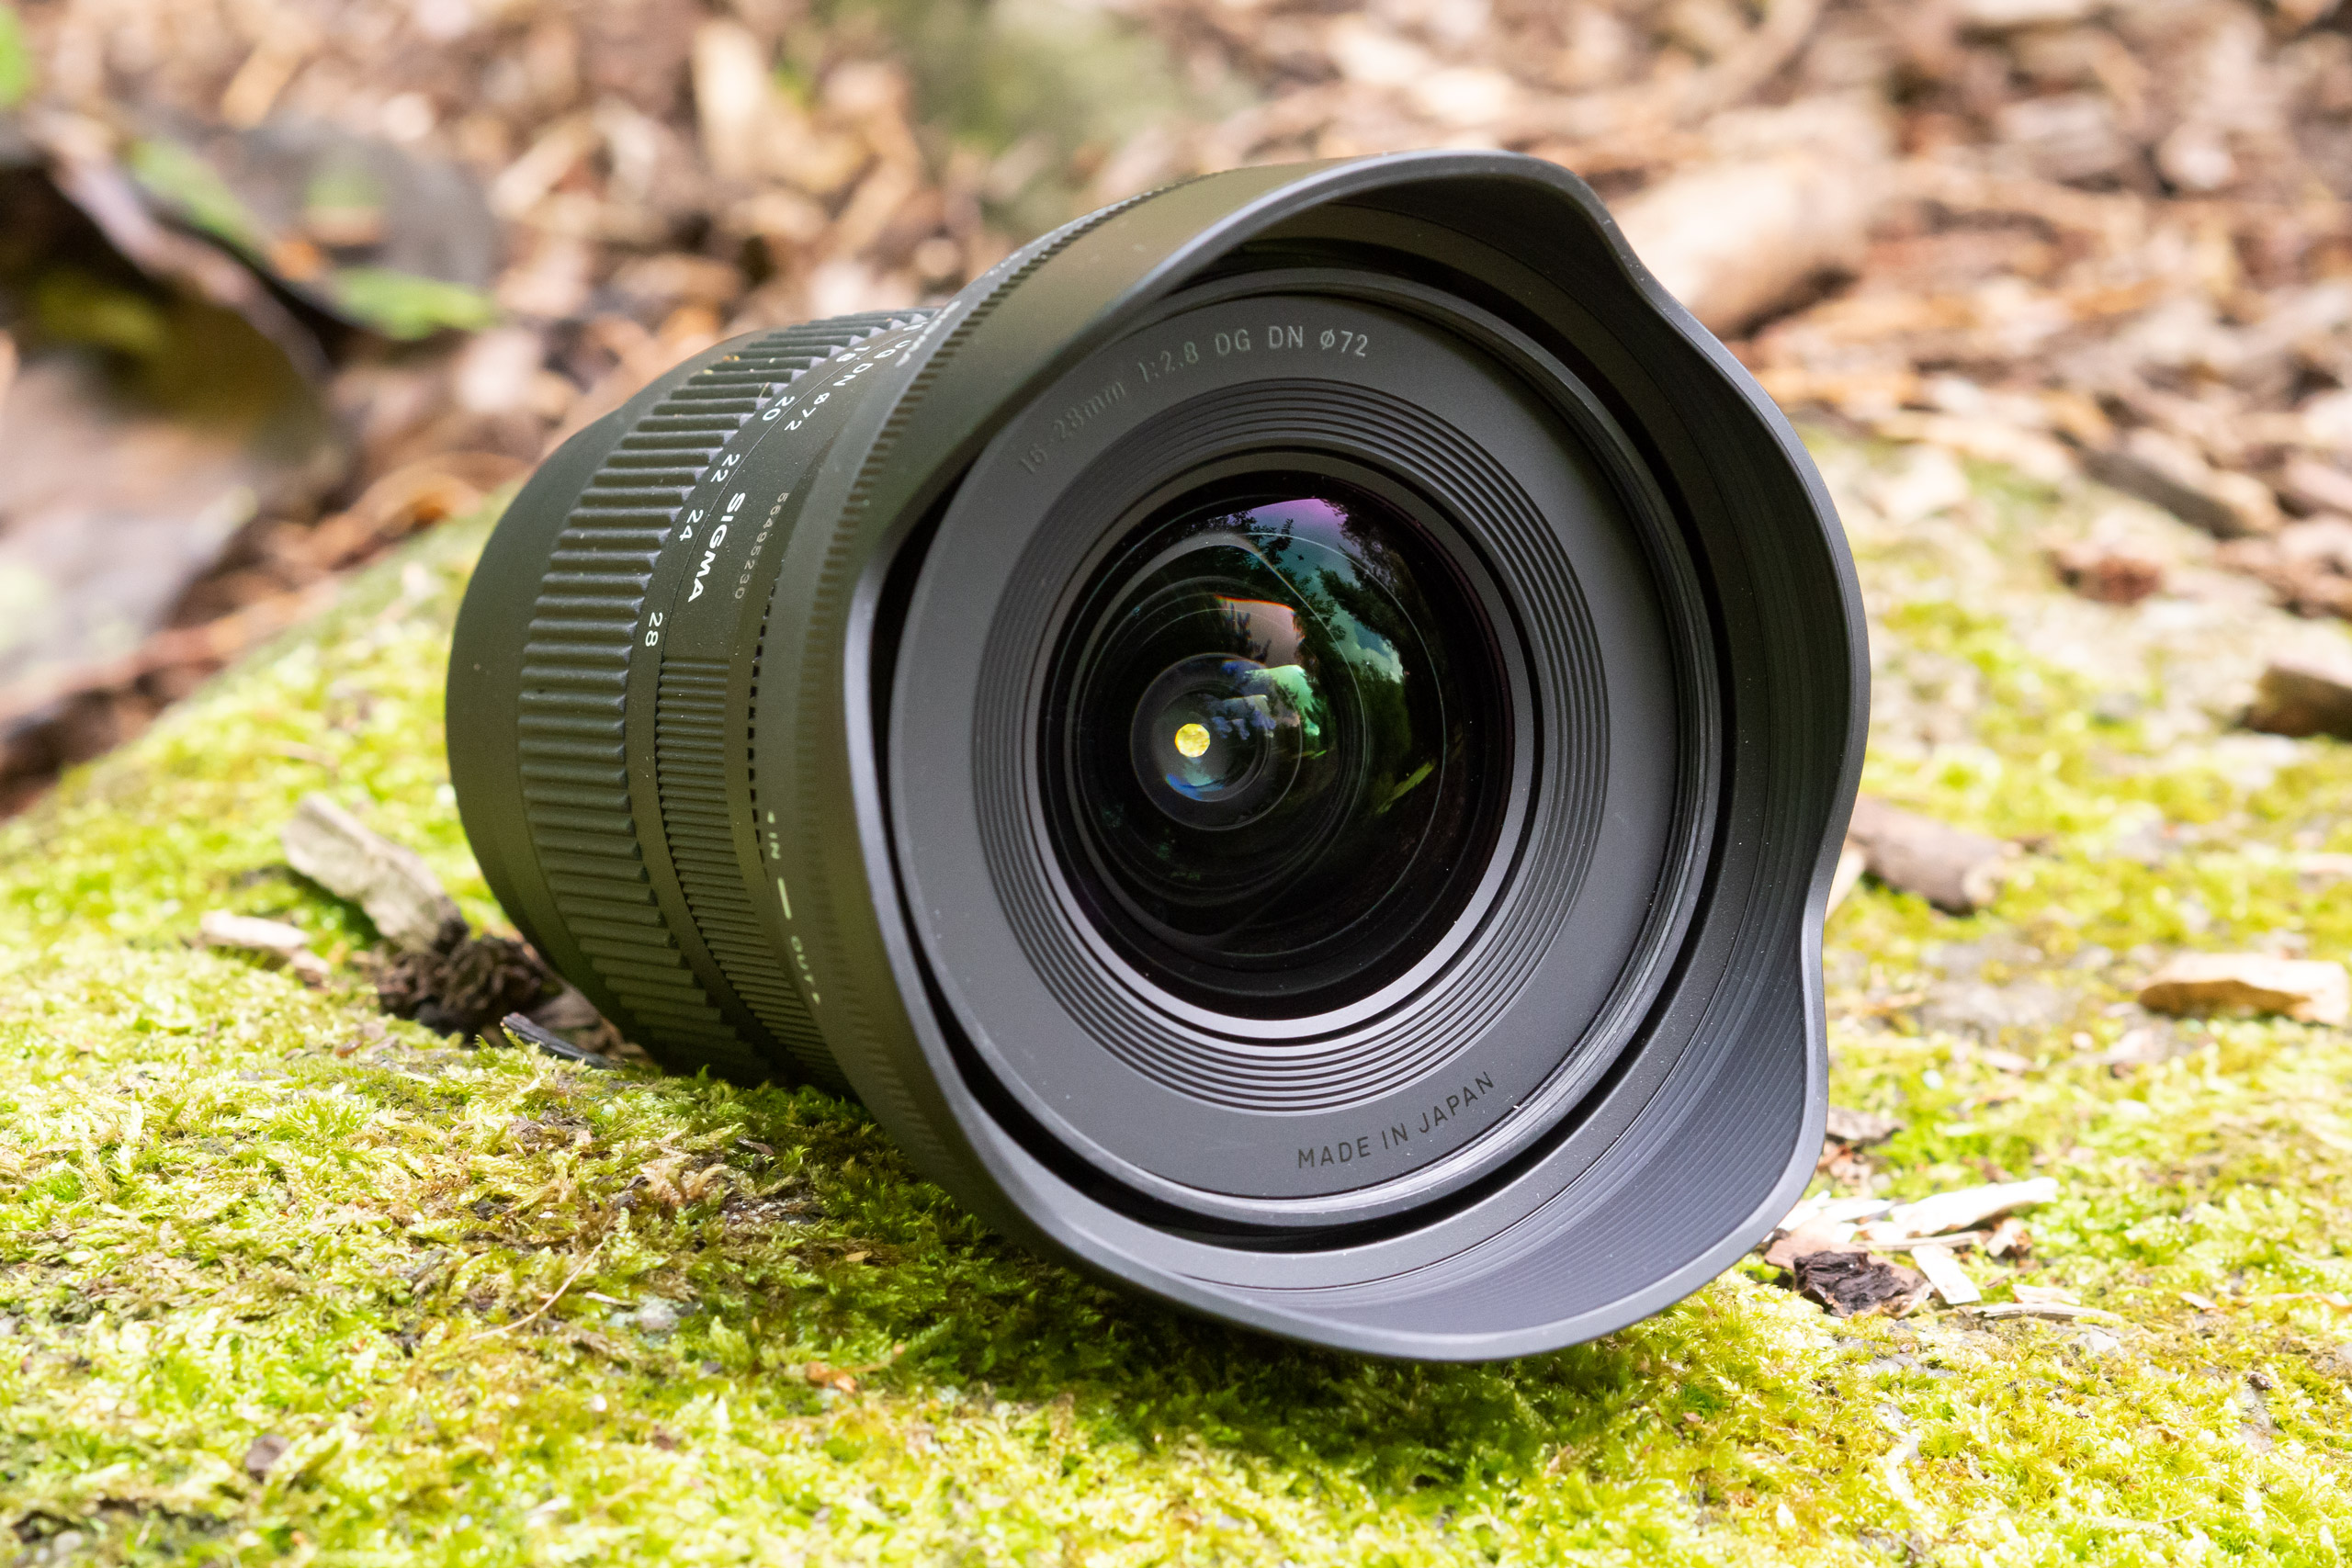 The Sigma 16-28mm F2.8 DG DN C lens from the front